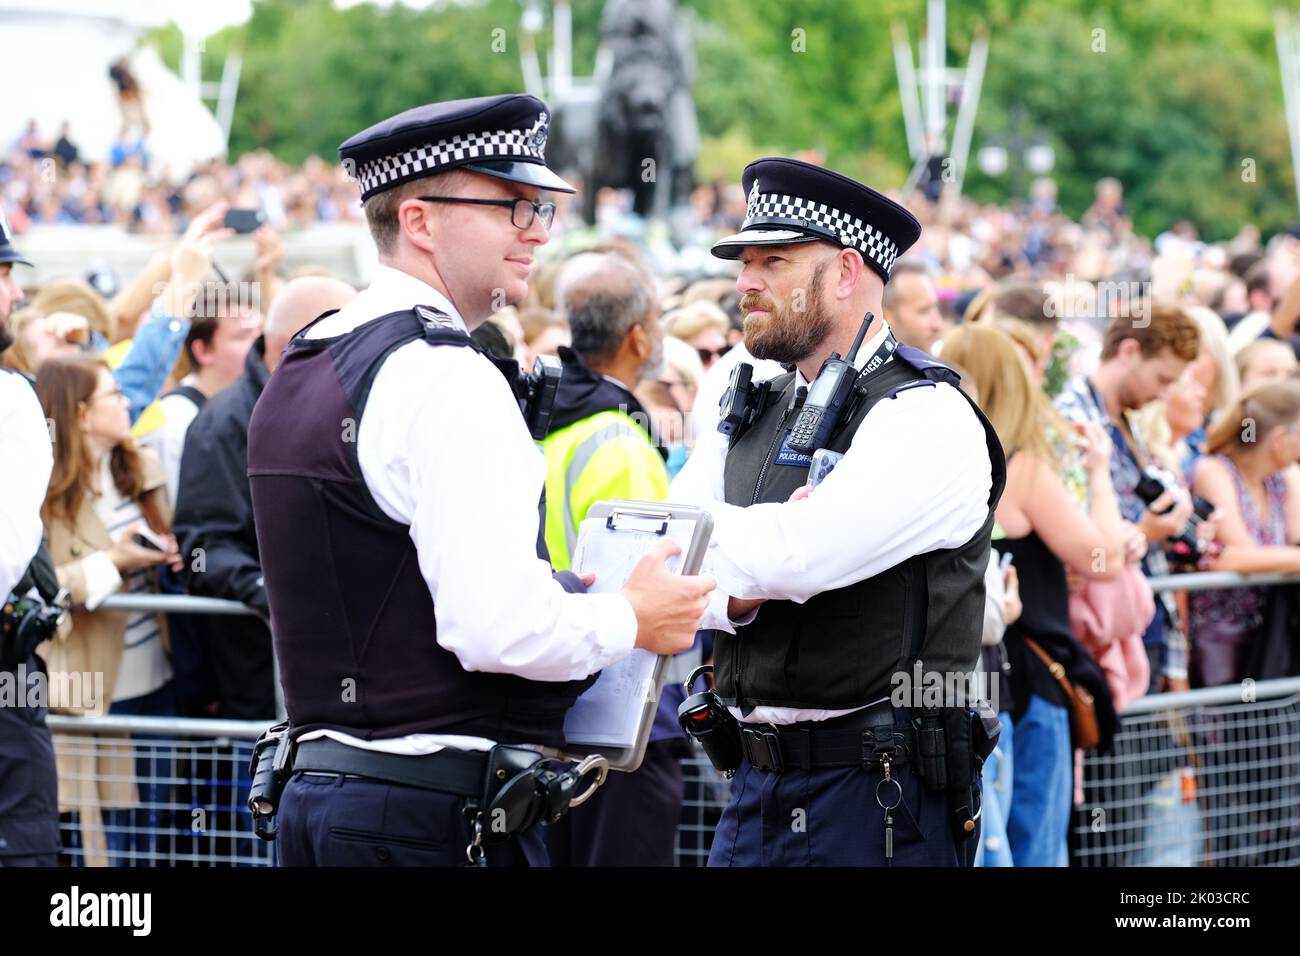 Buckingham Palace, London, UK – Friday 9th September 2022 – Senior Police officers manage the security and public order as large crowds gather outside Buckingham Palace to mourn the death of Queen Elizabeth II. Photo Steven May / Alamy Live News Stock Photo